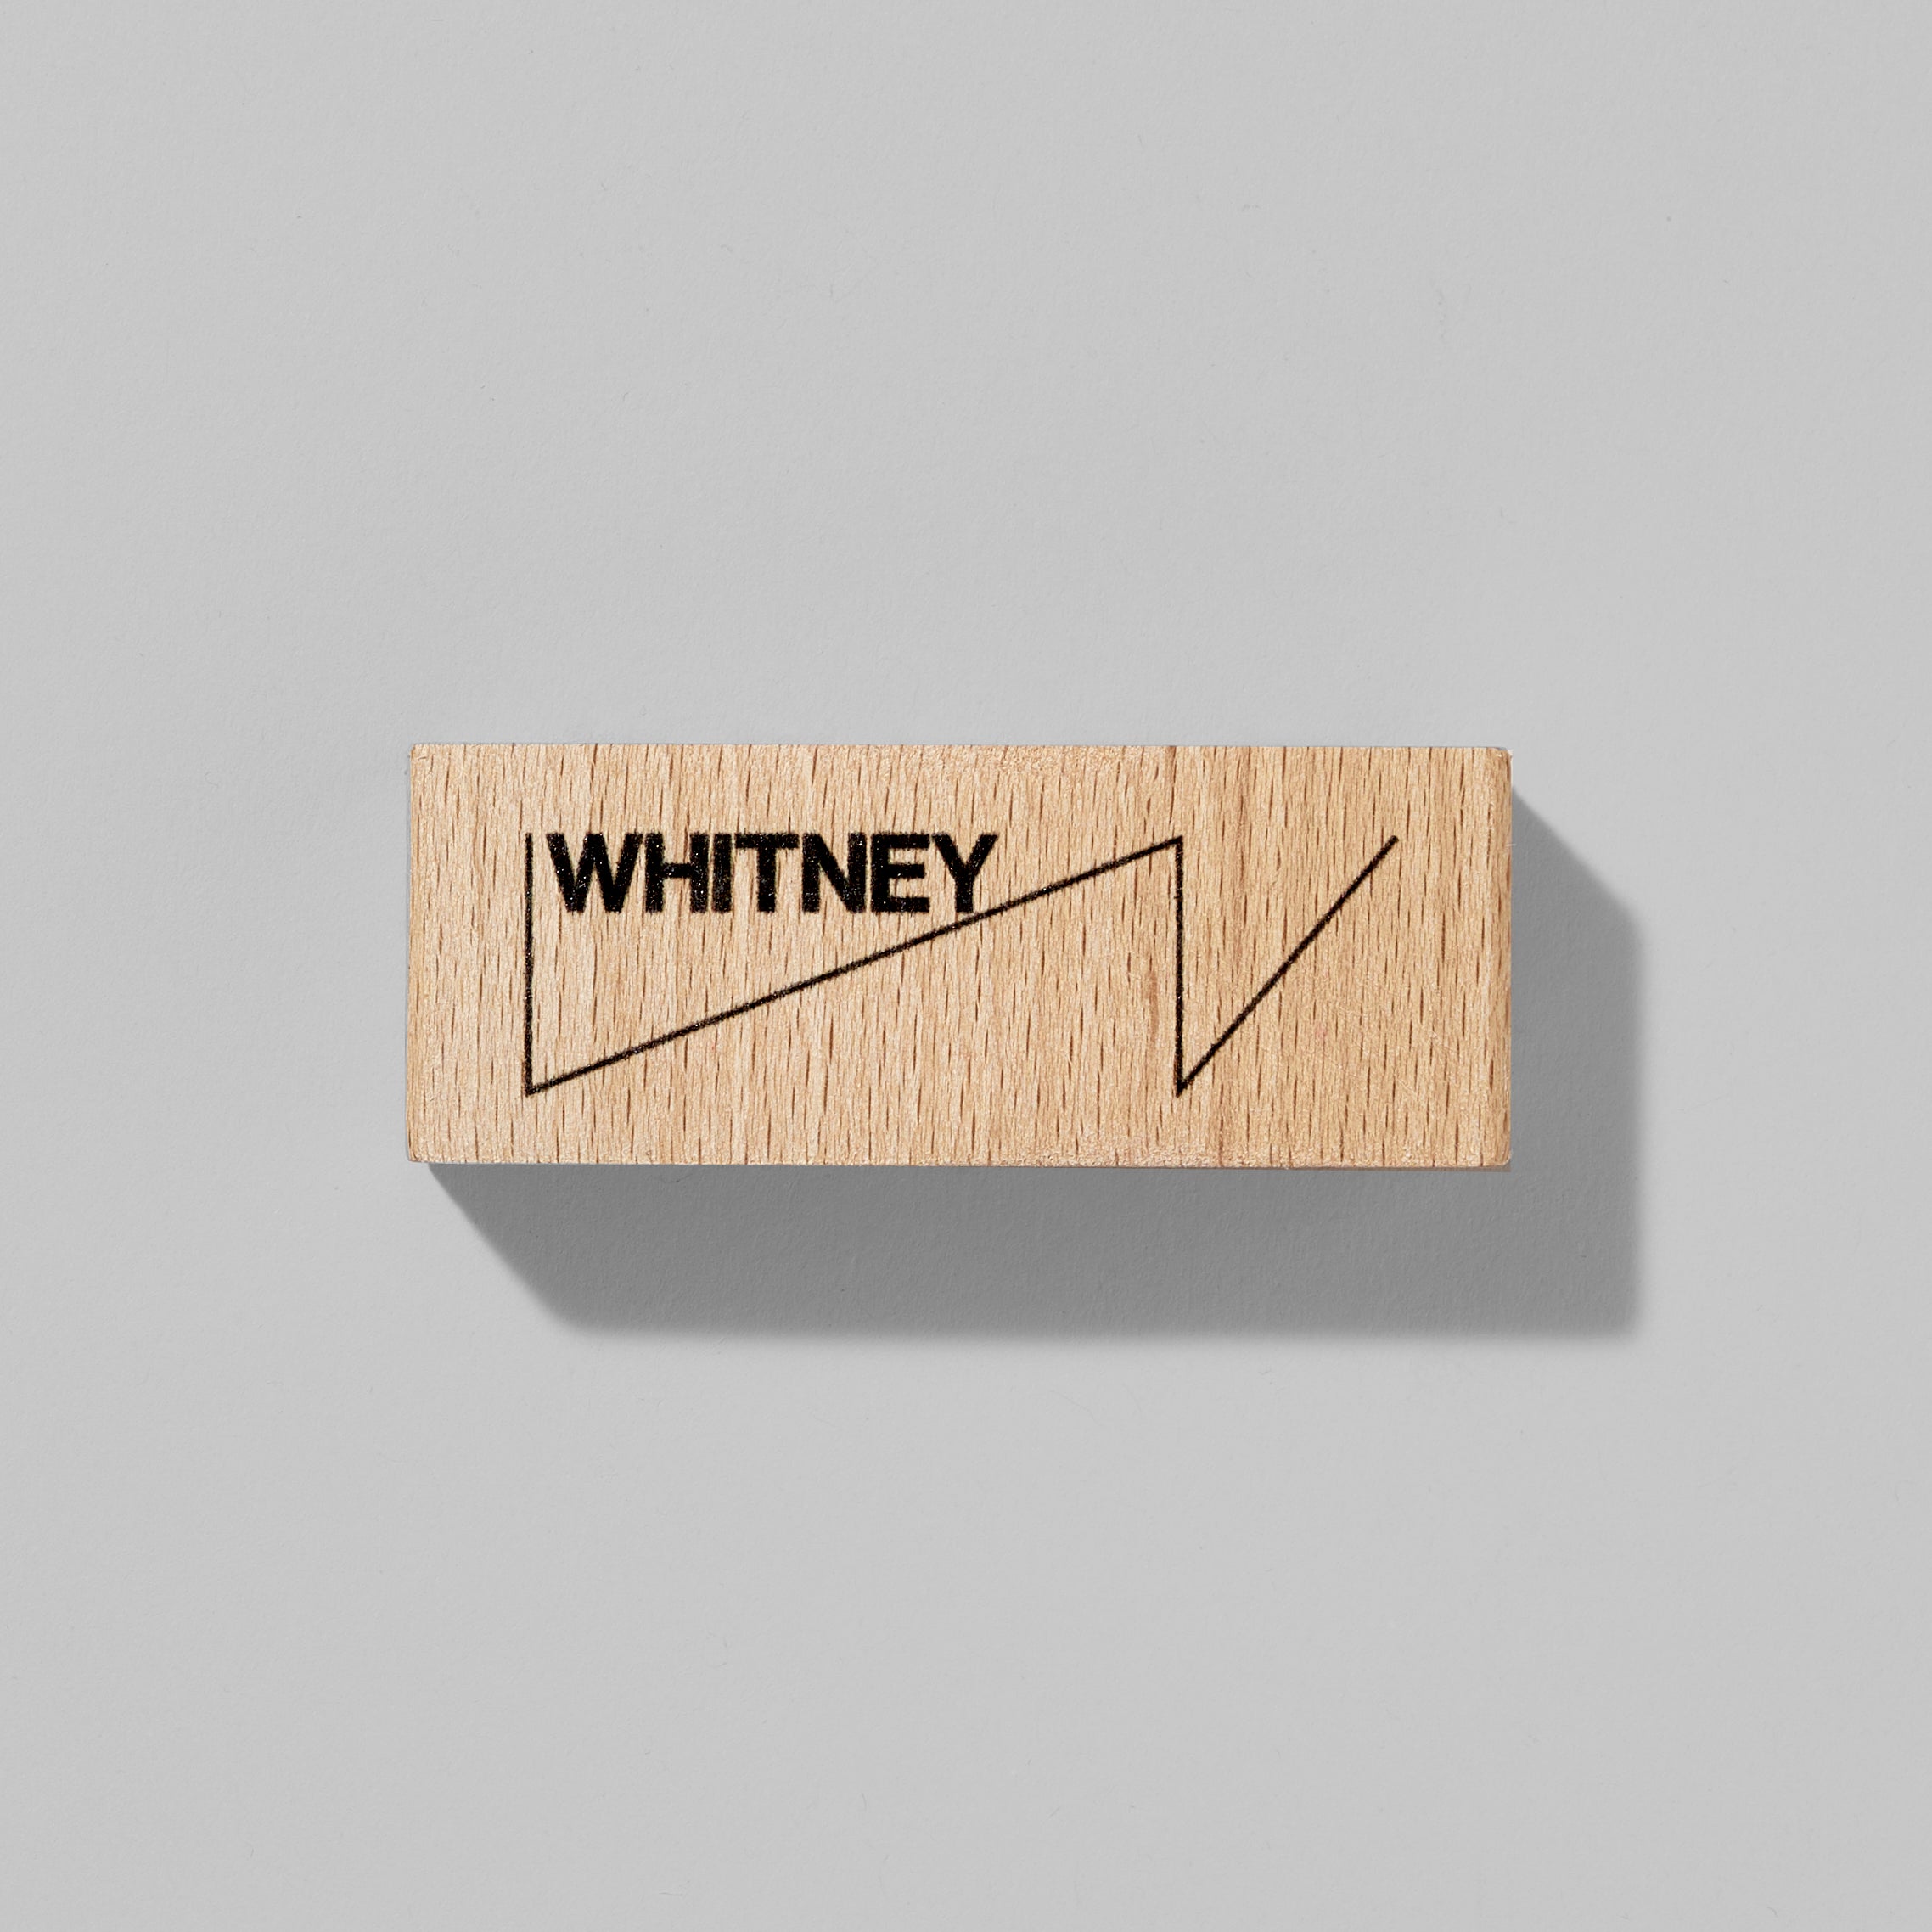 5 hole Whitney wooden sharpener. Measures 2.75" x 1" x 0.75"